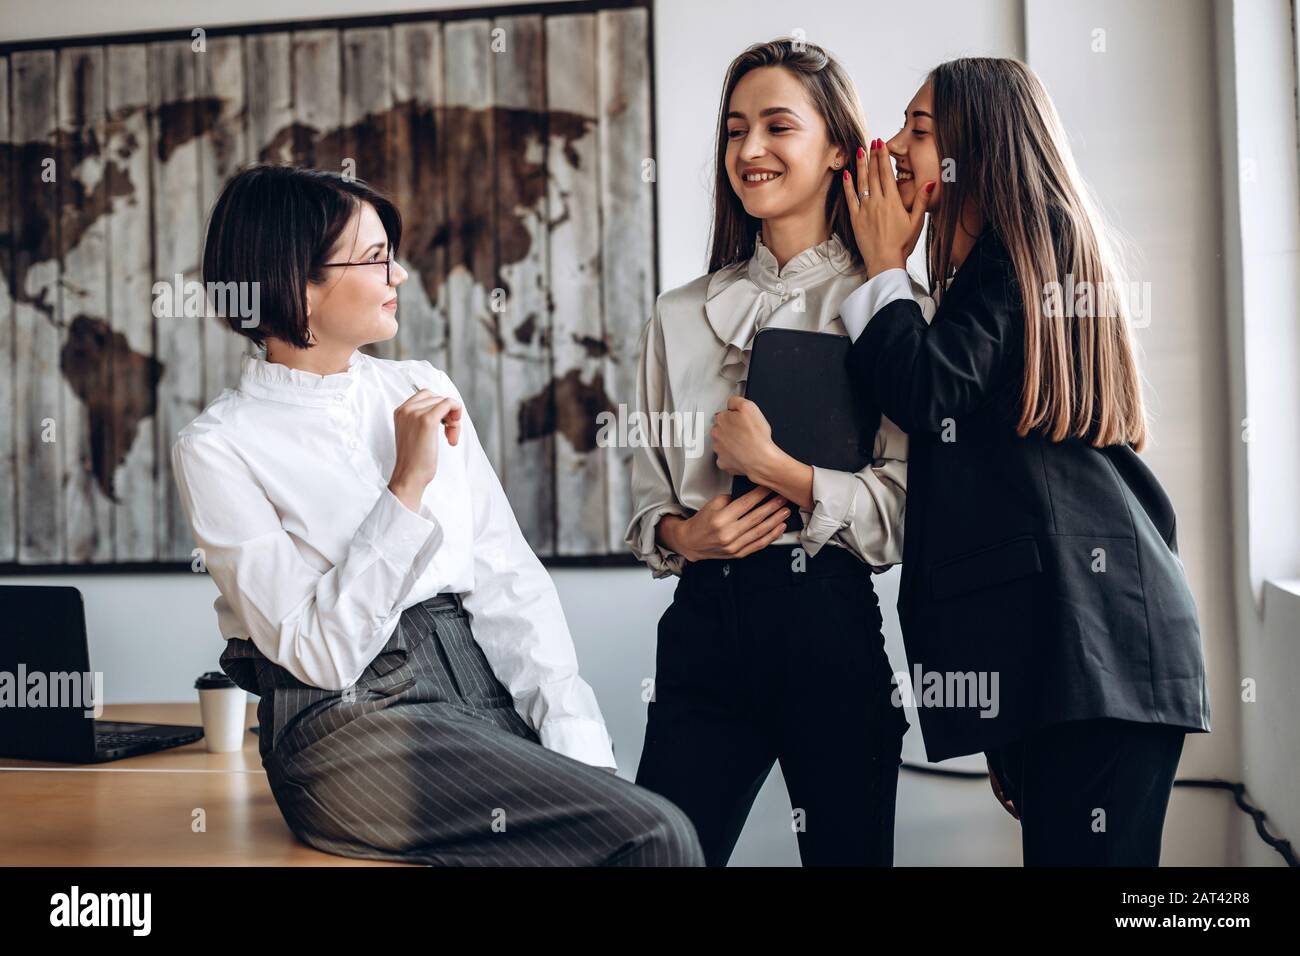 Beautiful businesswomen discuss and whisper to each other Stock Photo